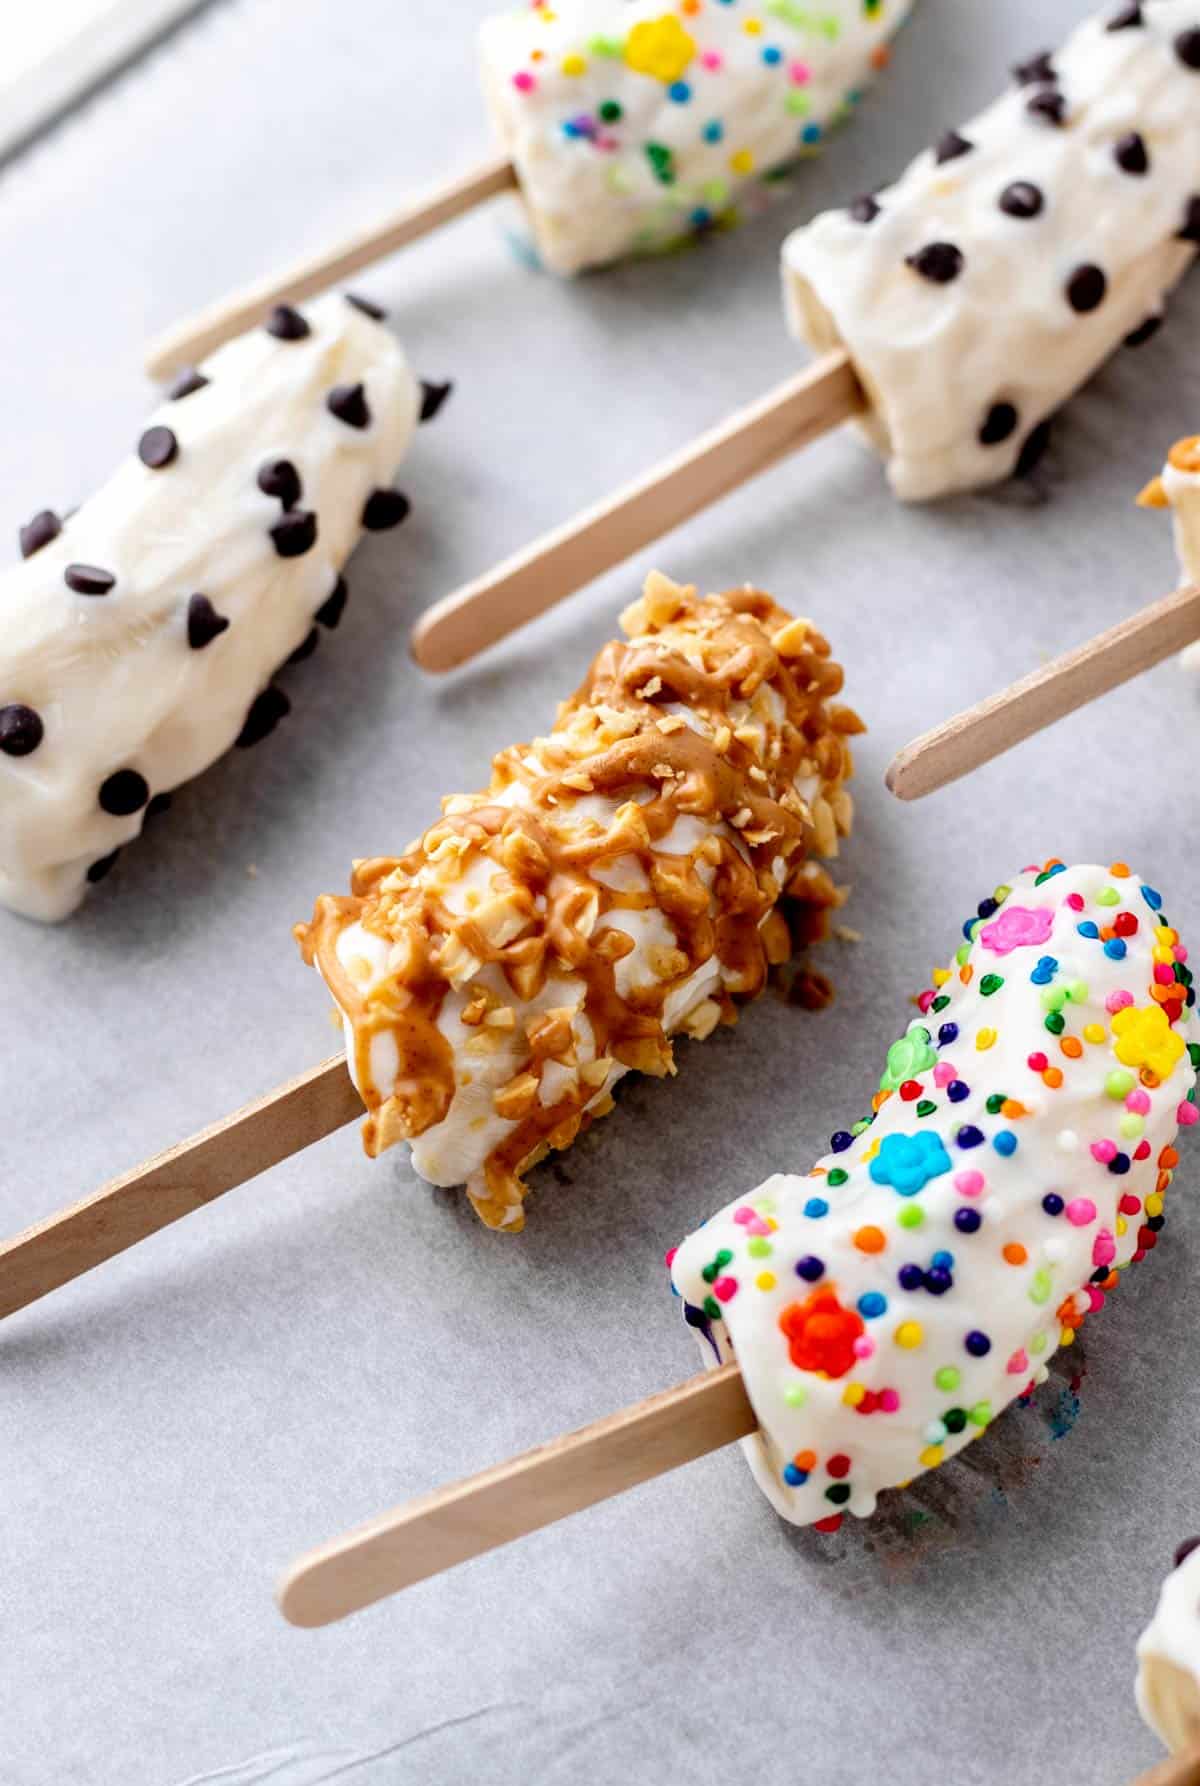 A close-up of the frozen banana pops with yogurt covered in various toppings on a parchment paper lined baking sheet.